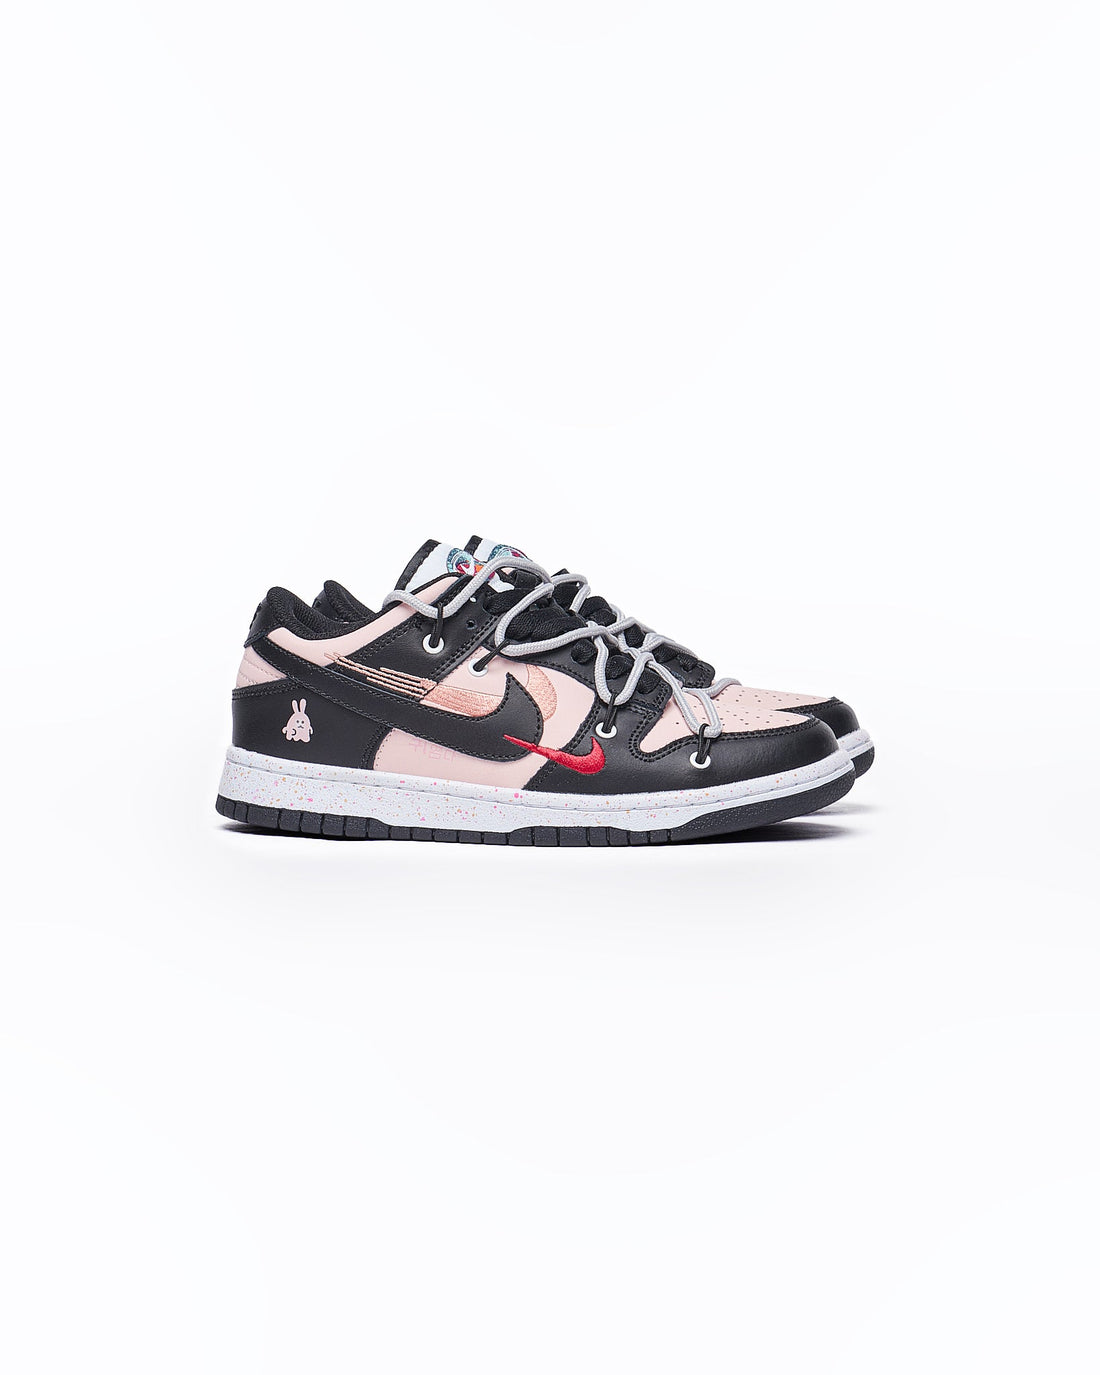 MOI OUTFIT-NIK Dunk Low Lady Pink Sneakers Shoes 75.90